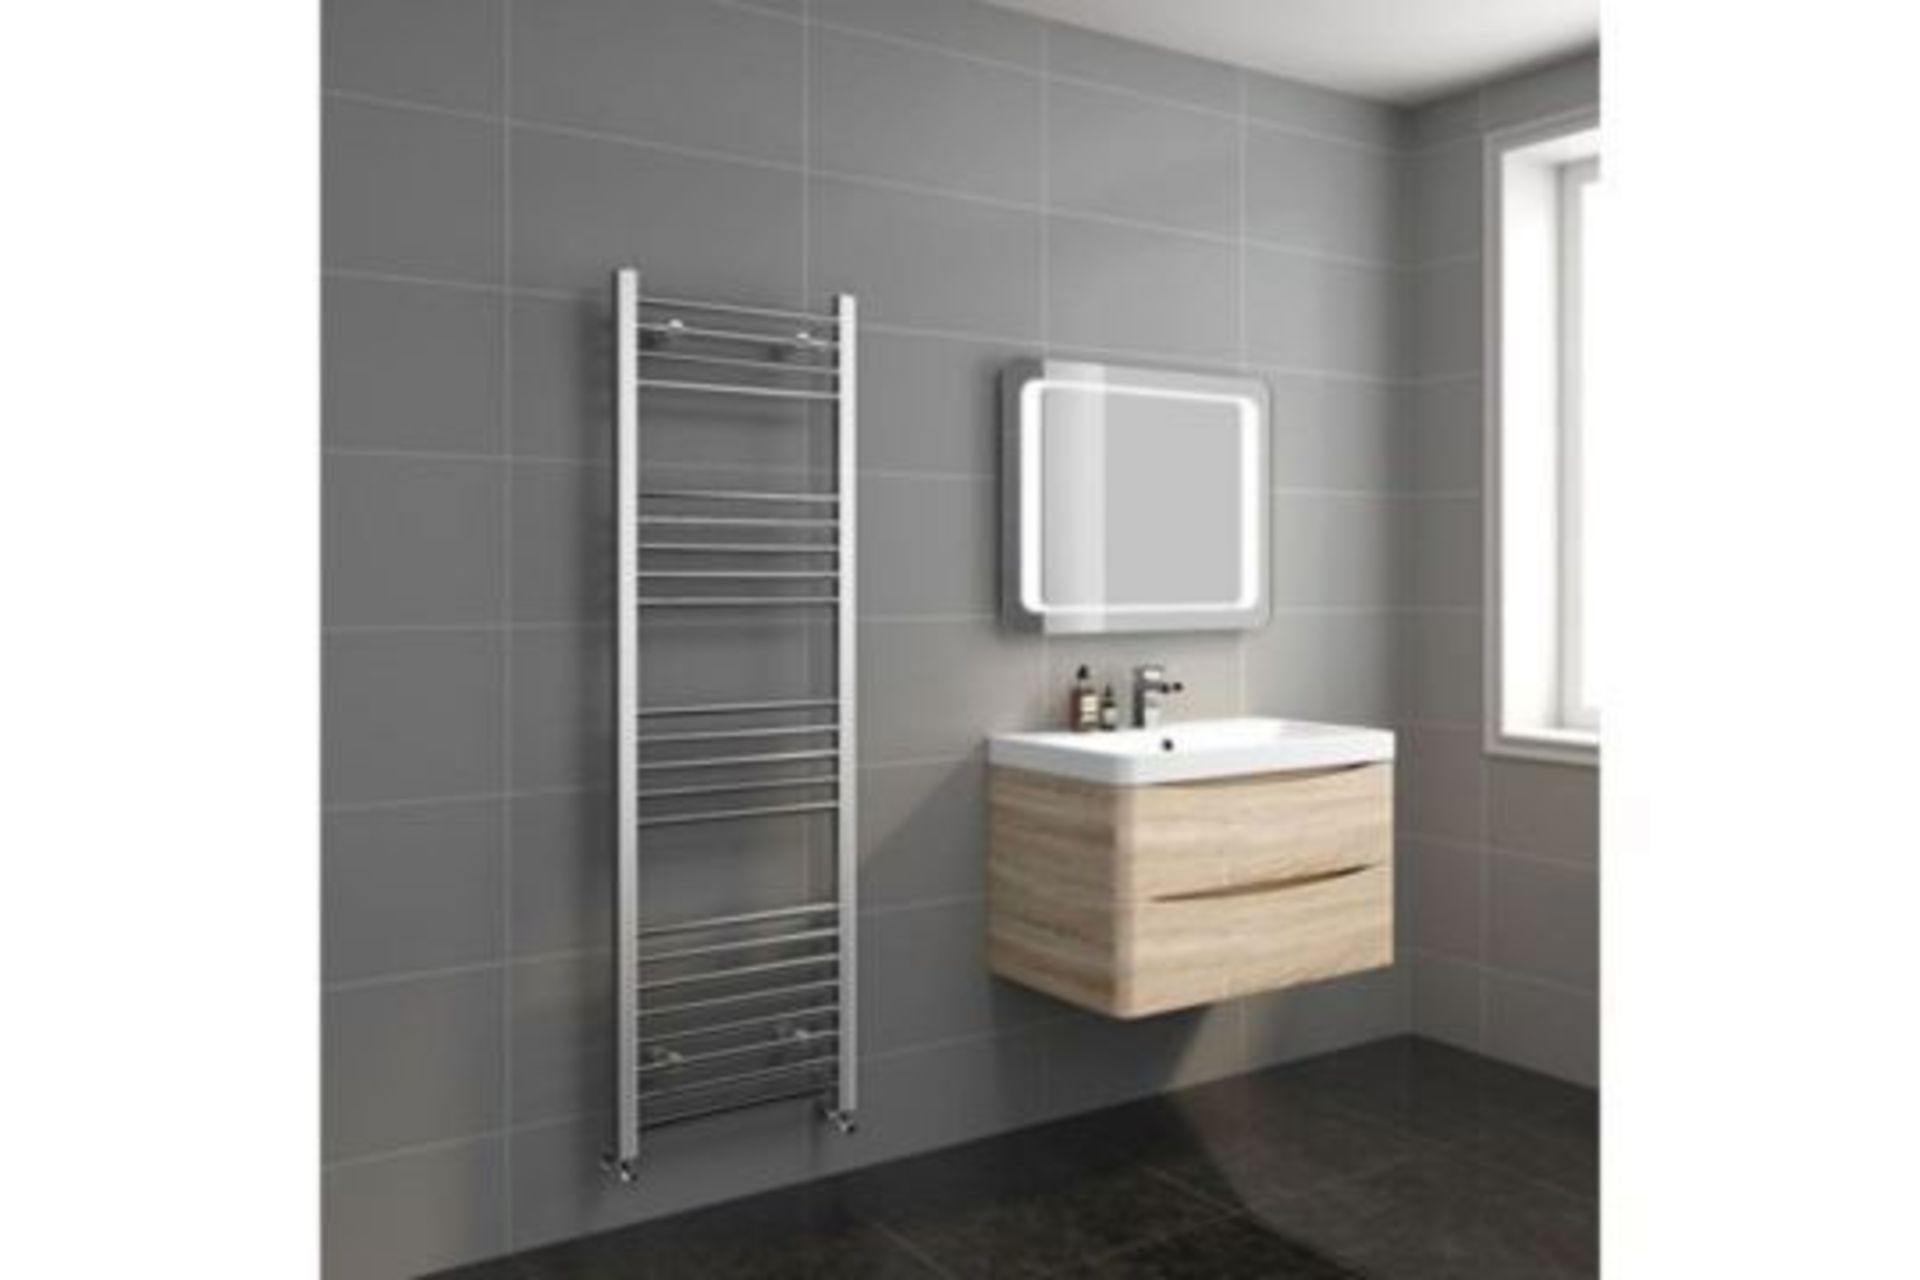 New & Boxed 1600x500mm - 20mm Tubes - Chrome Heated Straight Rail Ladder Towel Radiator. Ns160... - Image 2 of 2